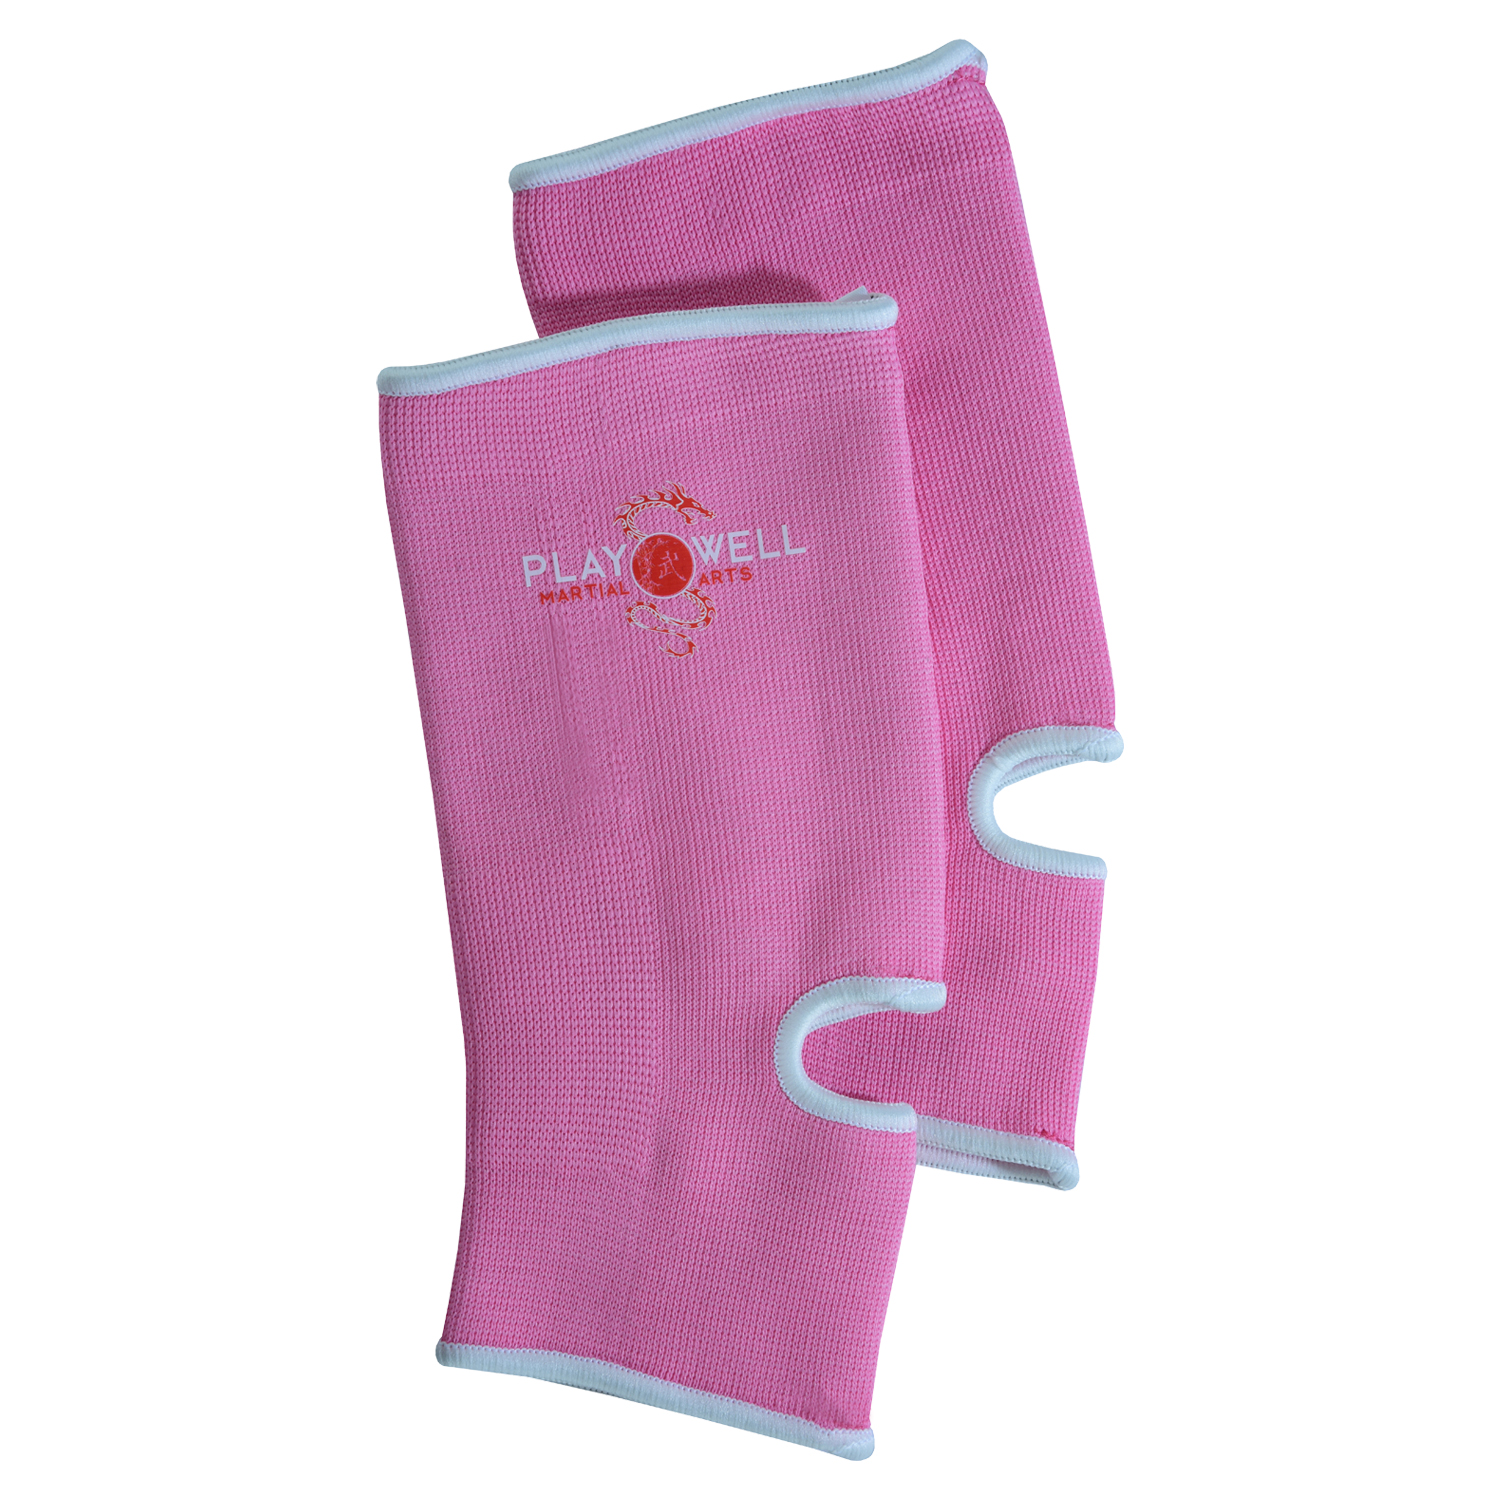 Playwell Muay Thai Elasticated Ankle Support - Pink - Click Image to Close